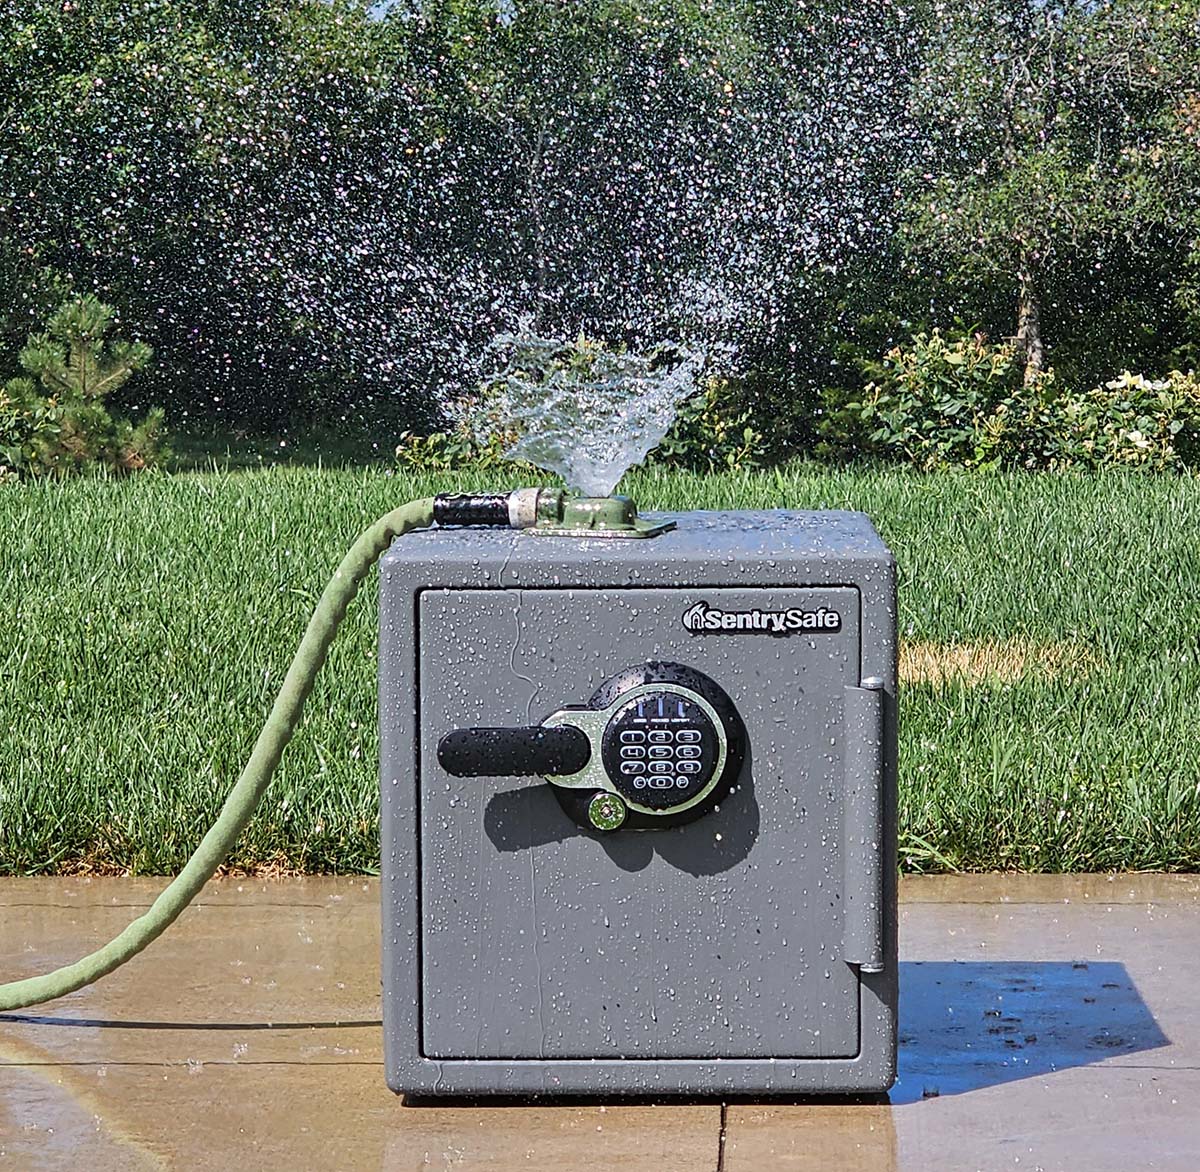 The SentrySafe home safe undergoing a water-resistance test with a sprinkler on it